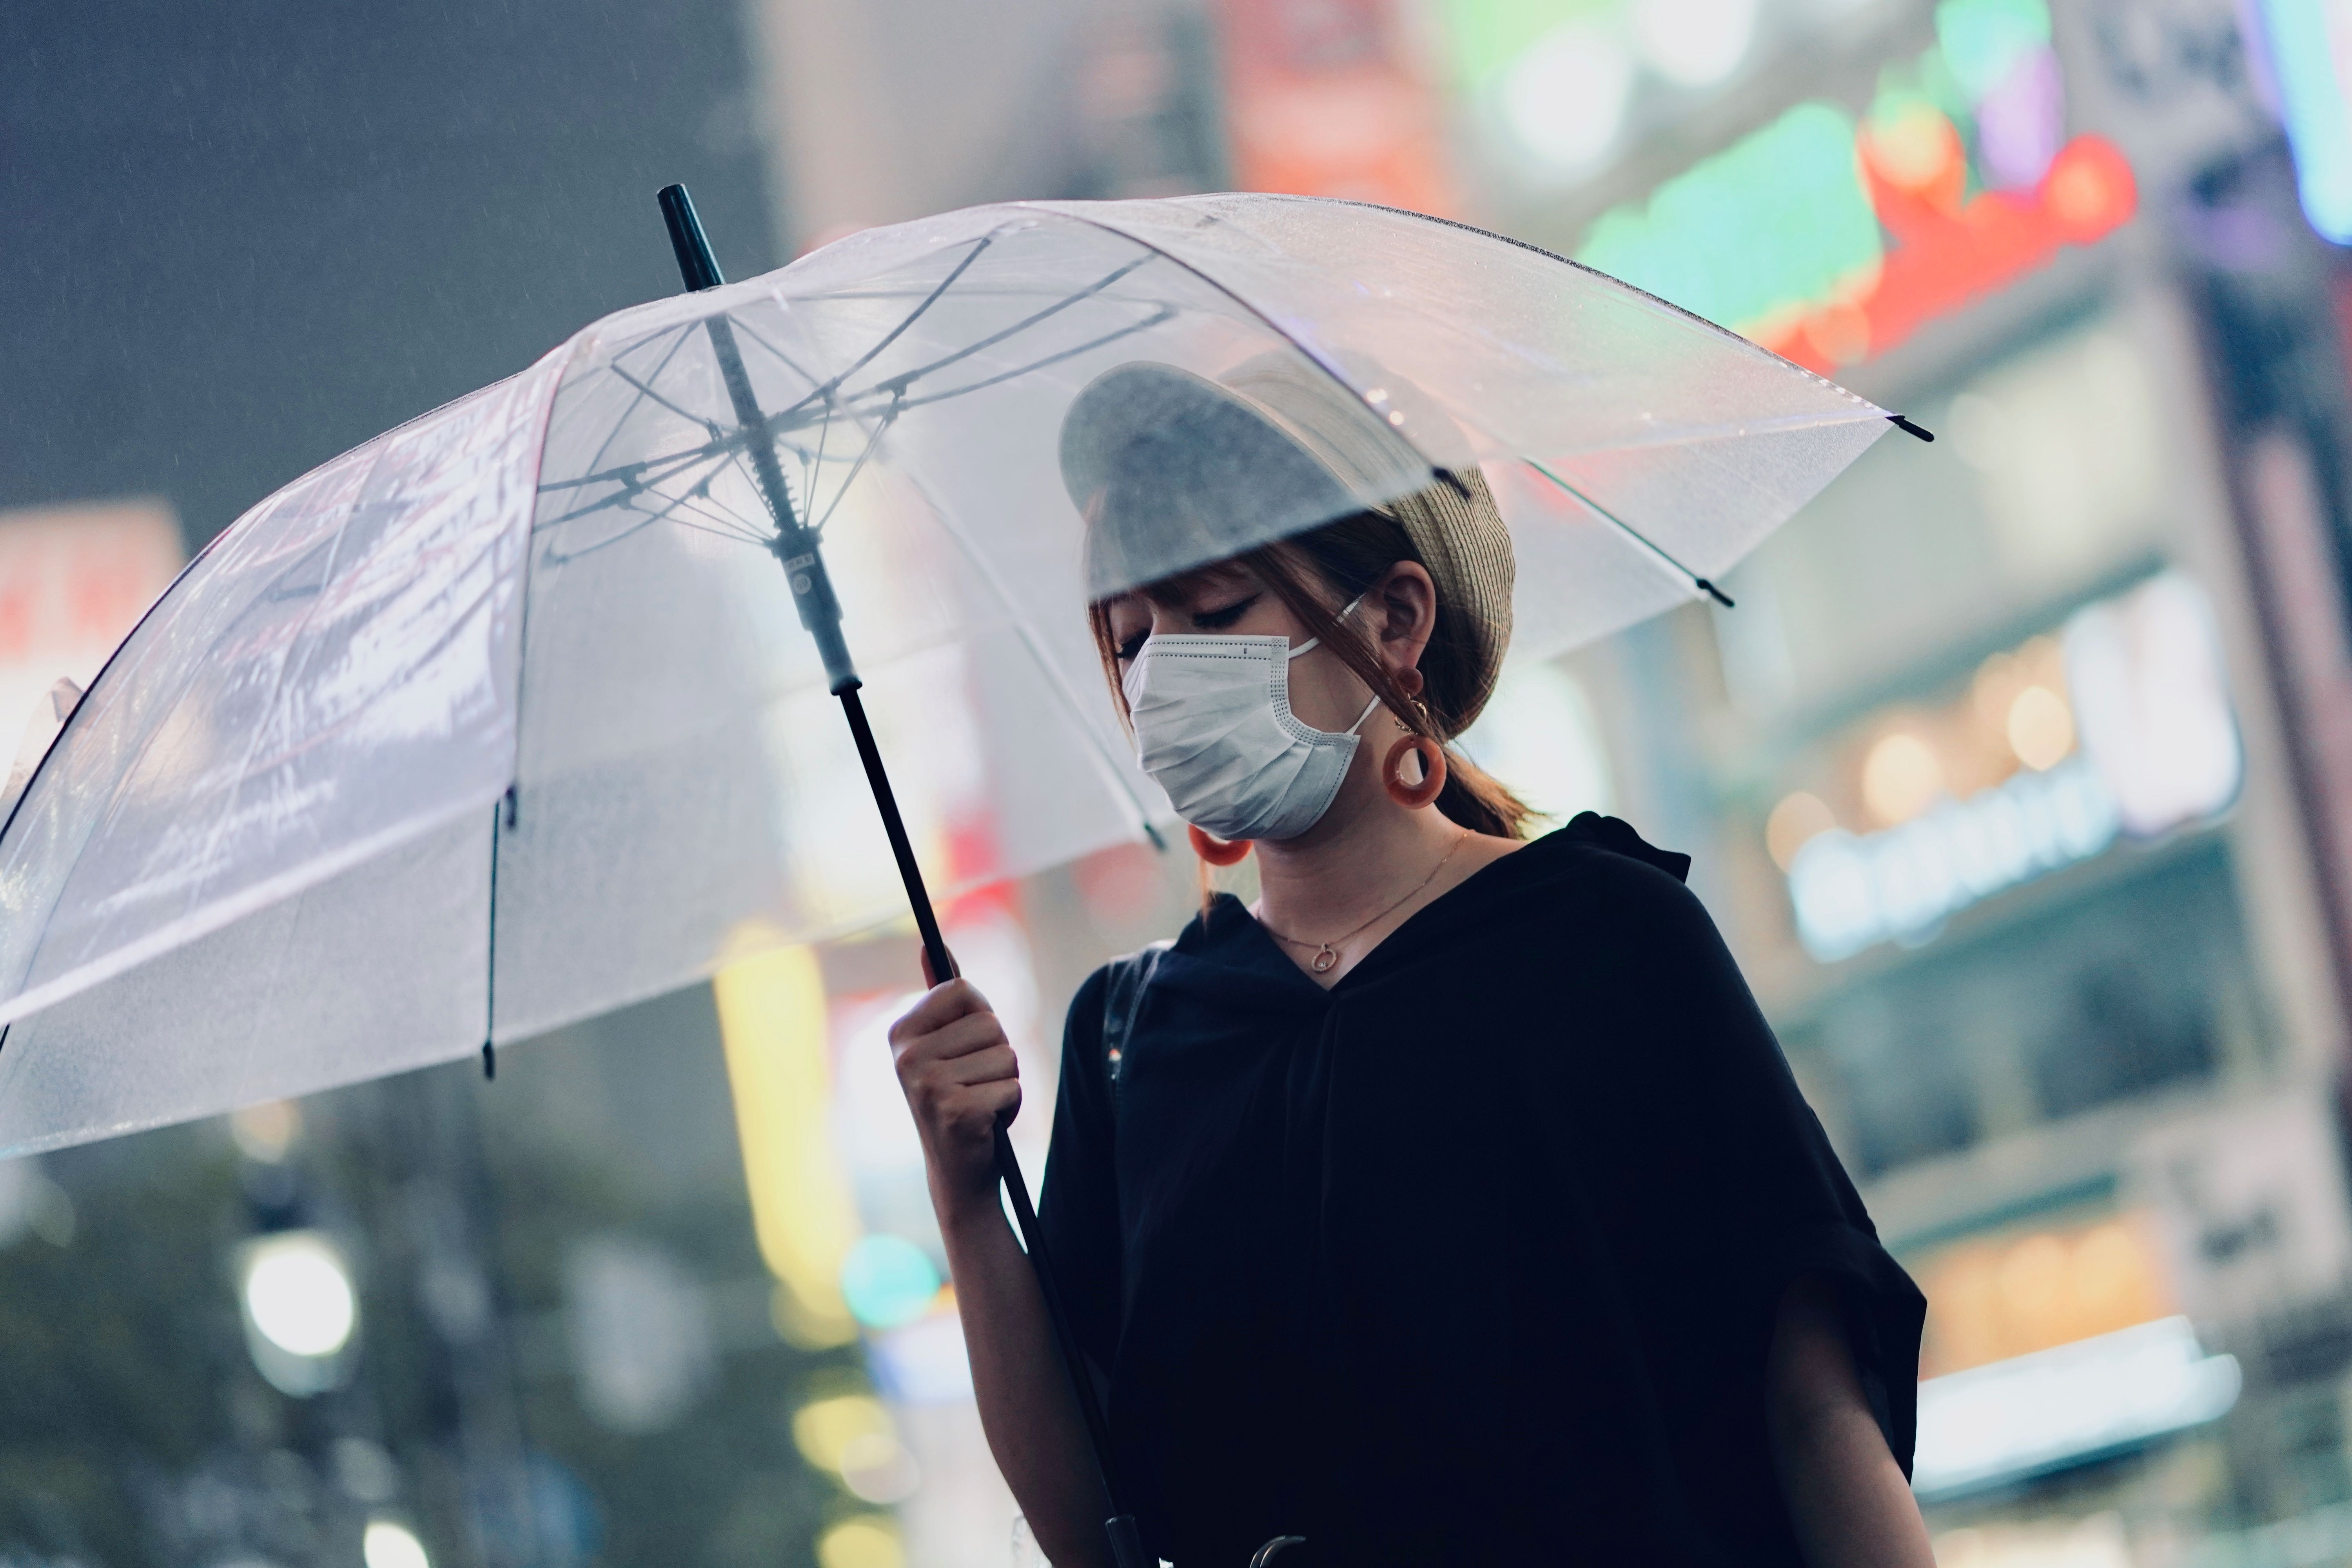 A woman wearing a mask and carrying an umbrella